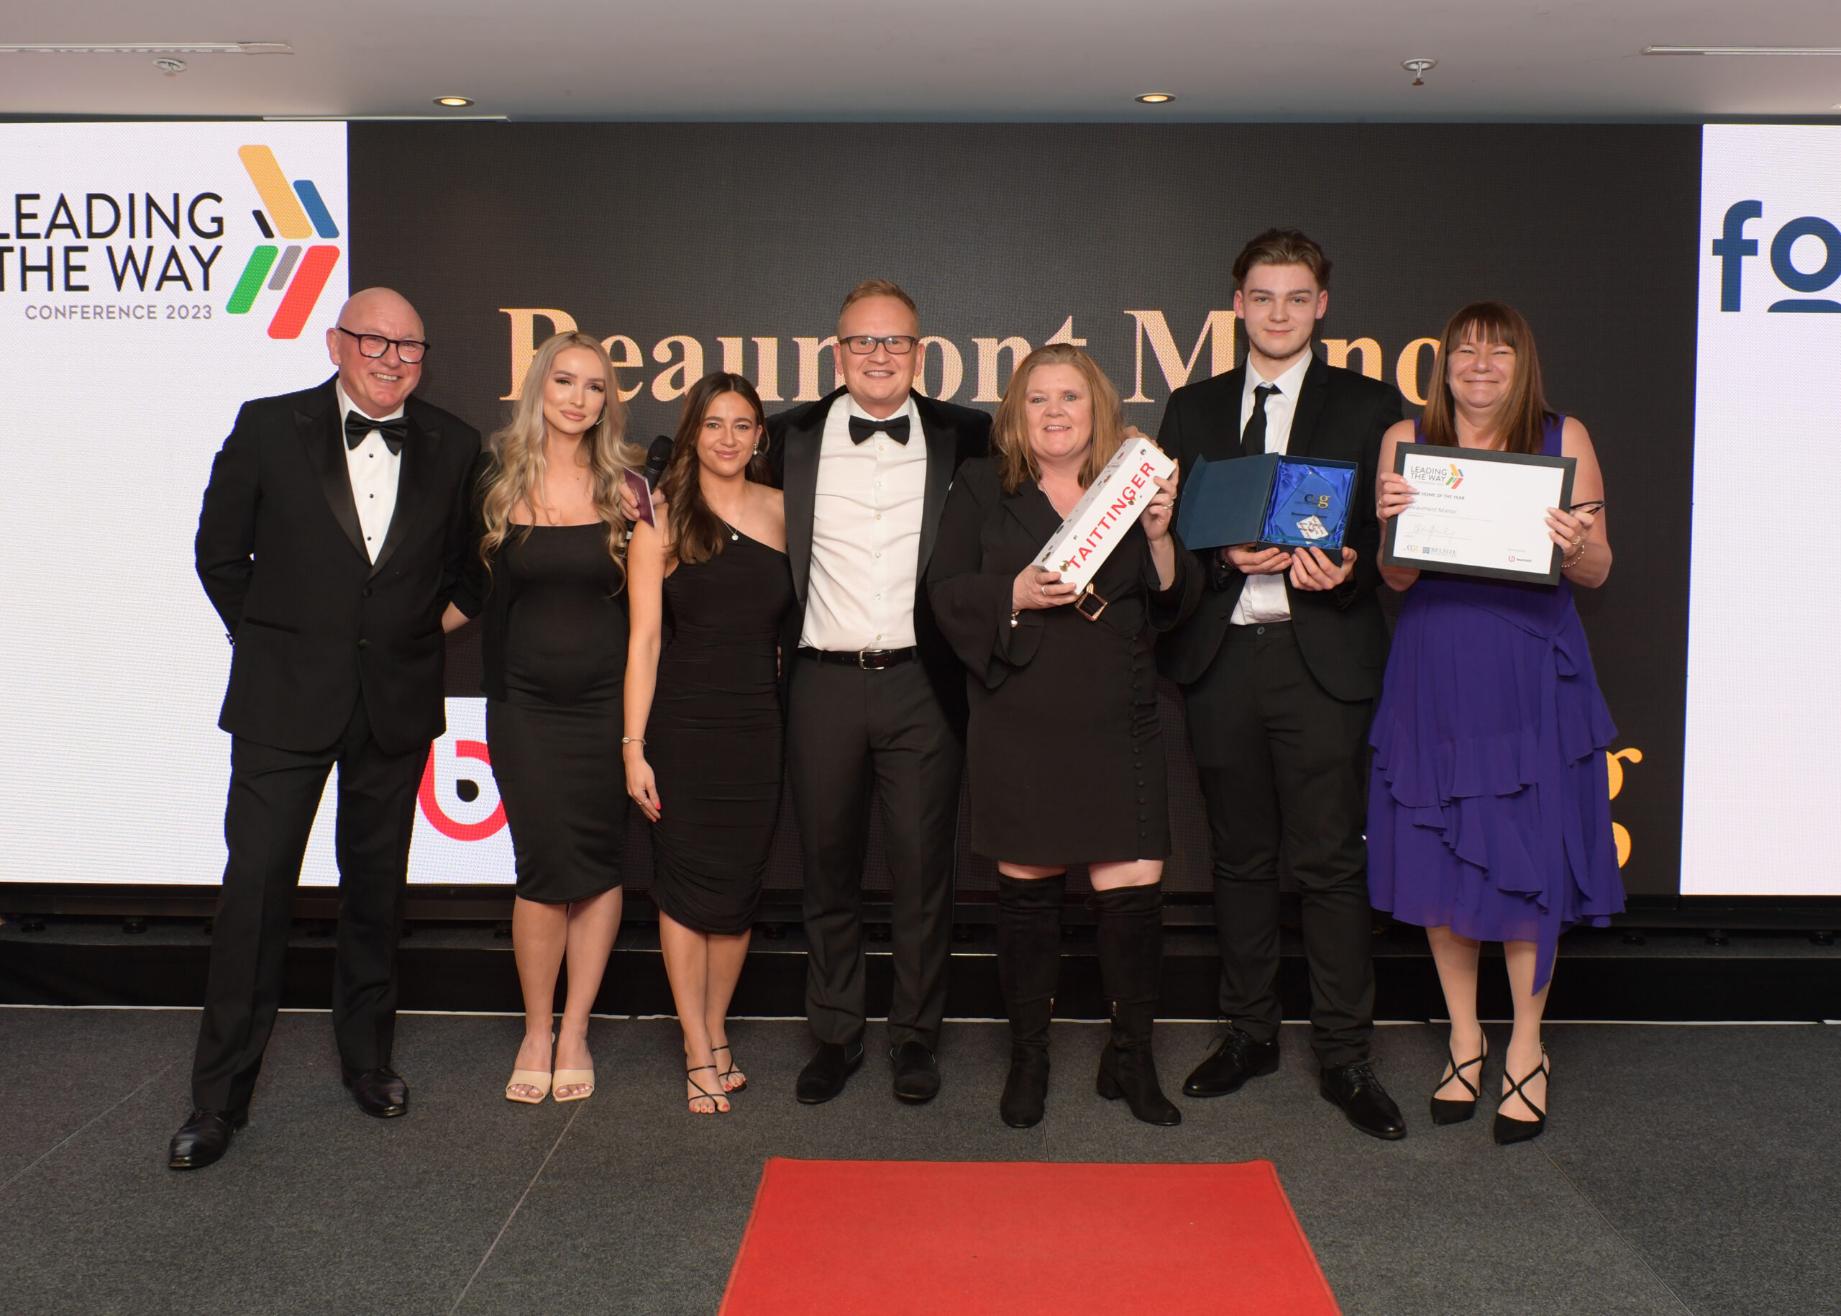 Beaumont Manor winning the care awards 2023